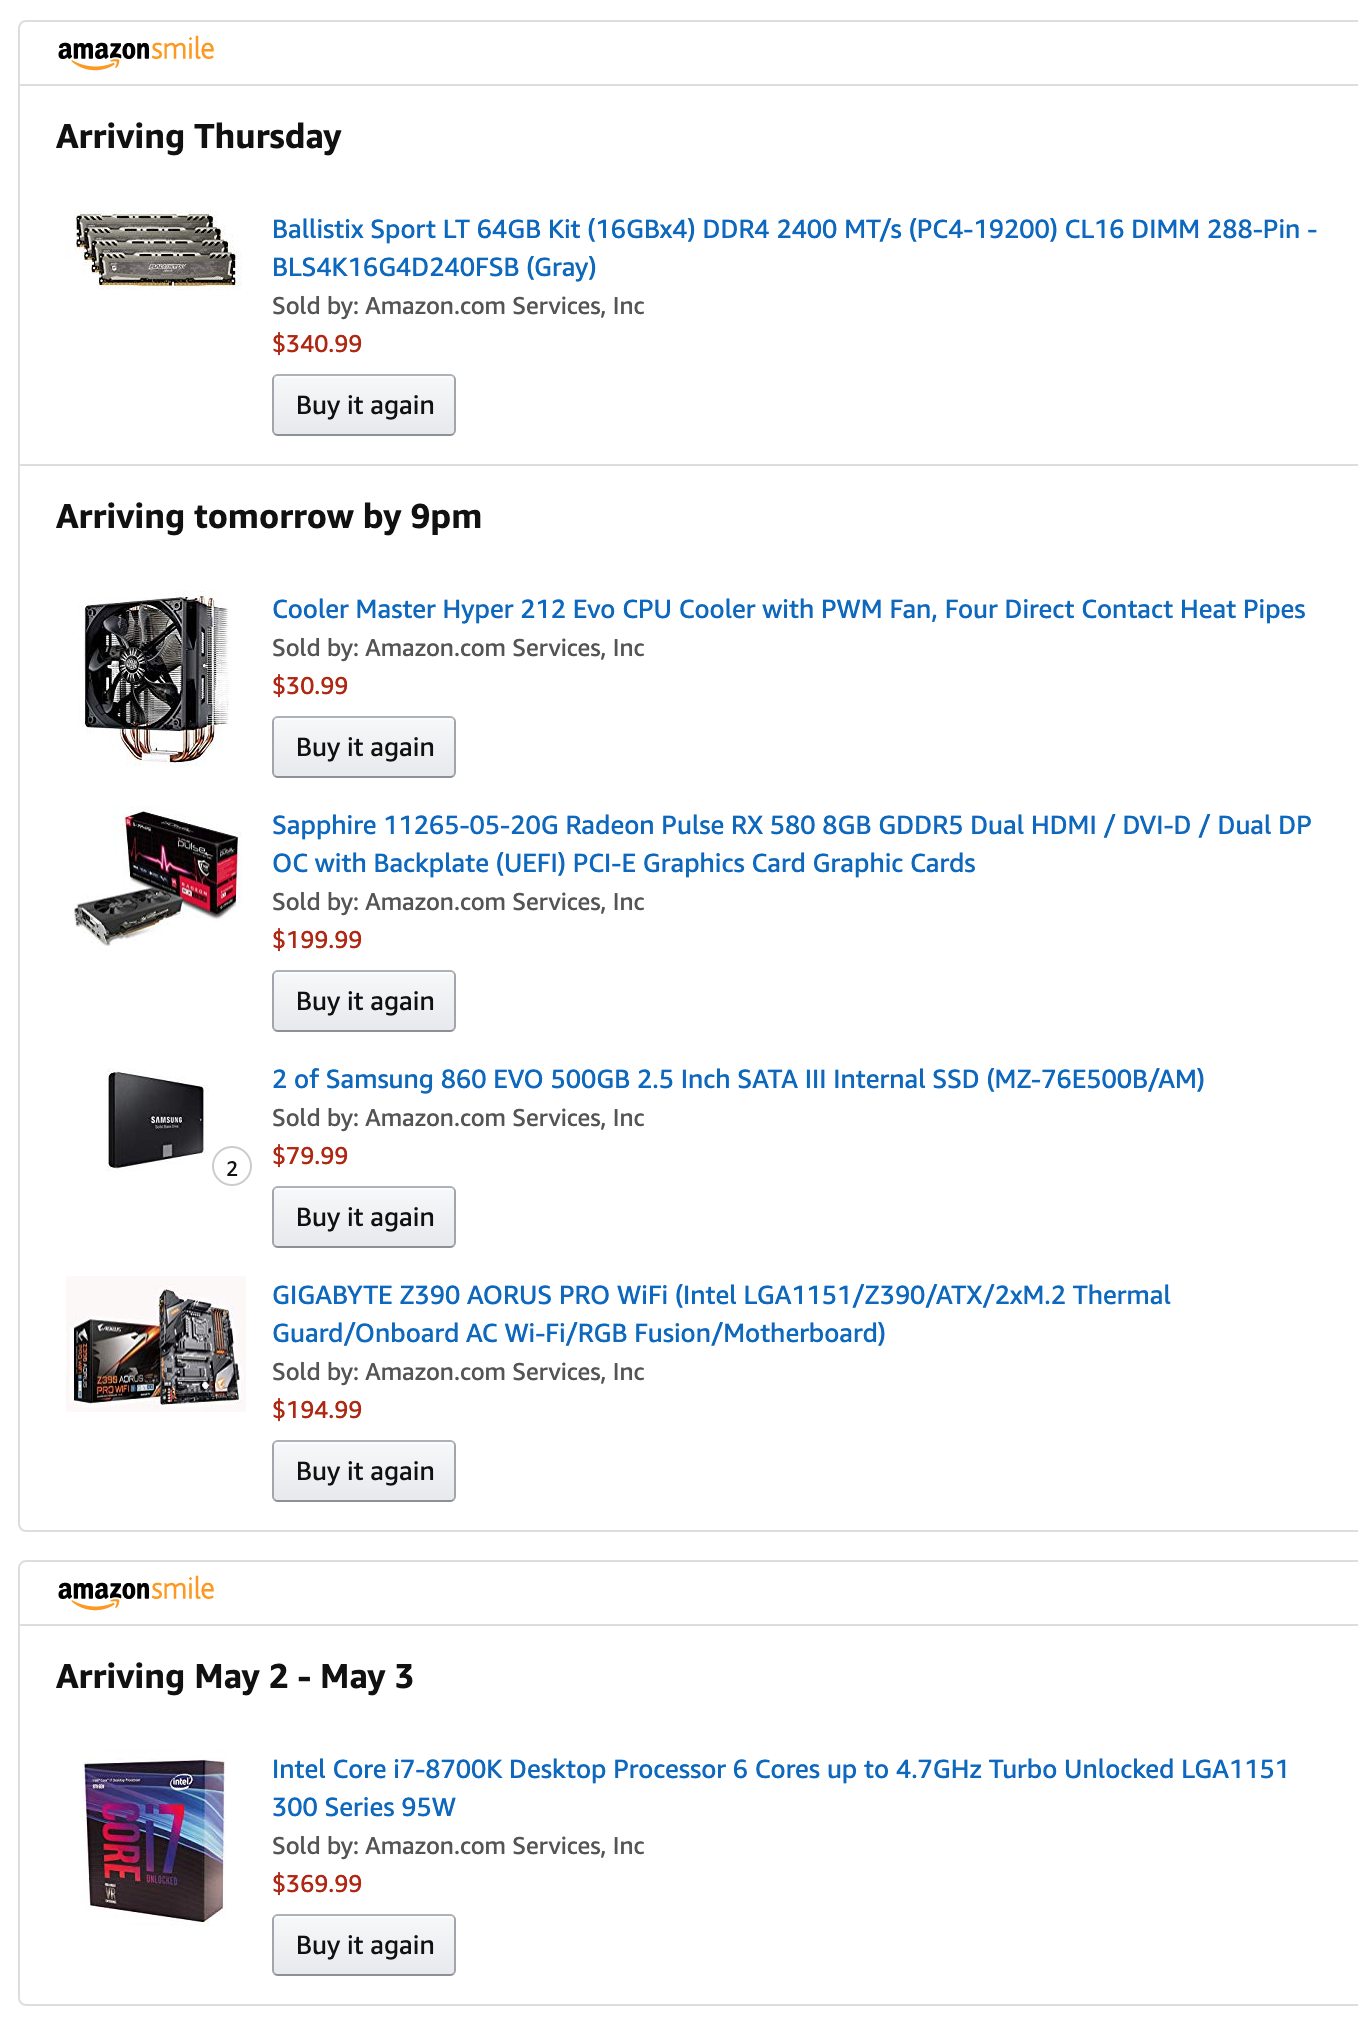 A list of my recent Amazon purchase of computer parts